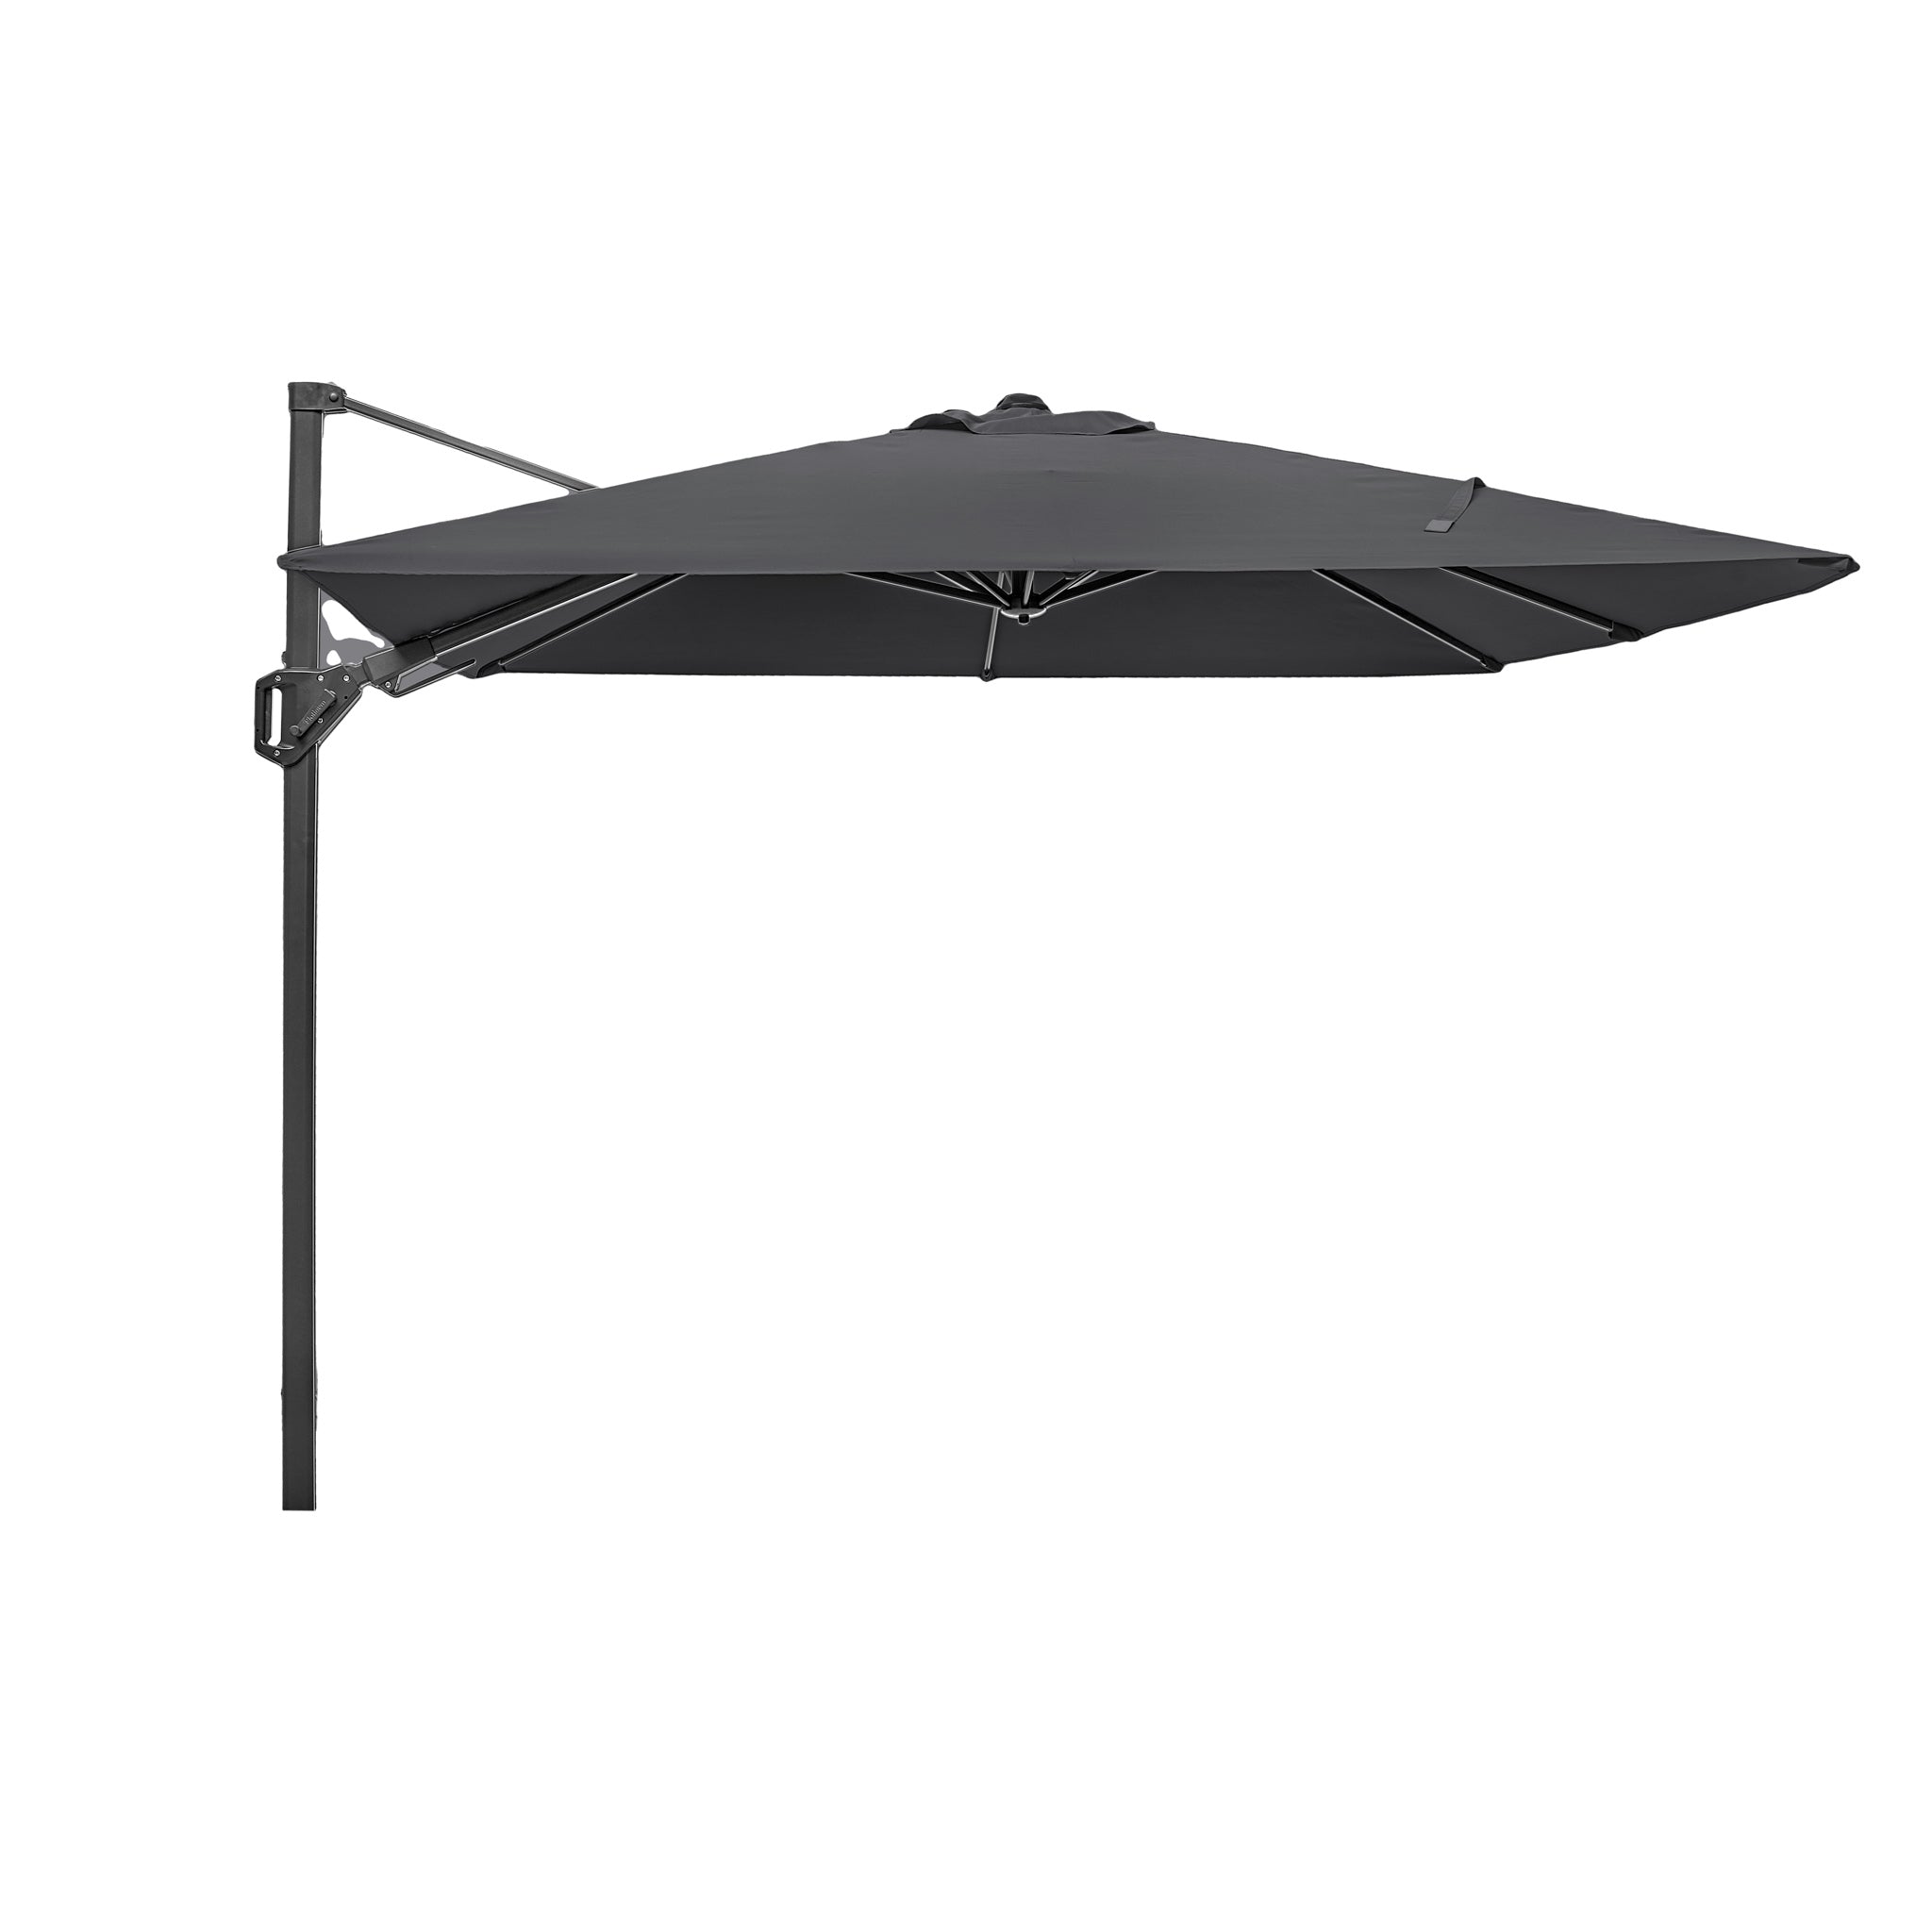 Voyager T2 2.7m Square Parasol in Grey